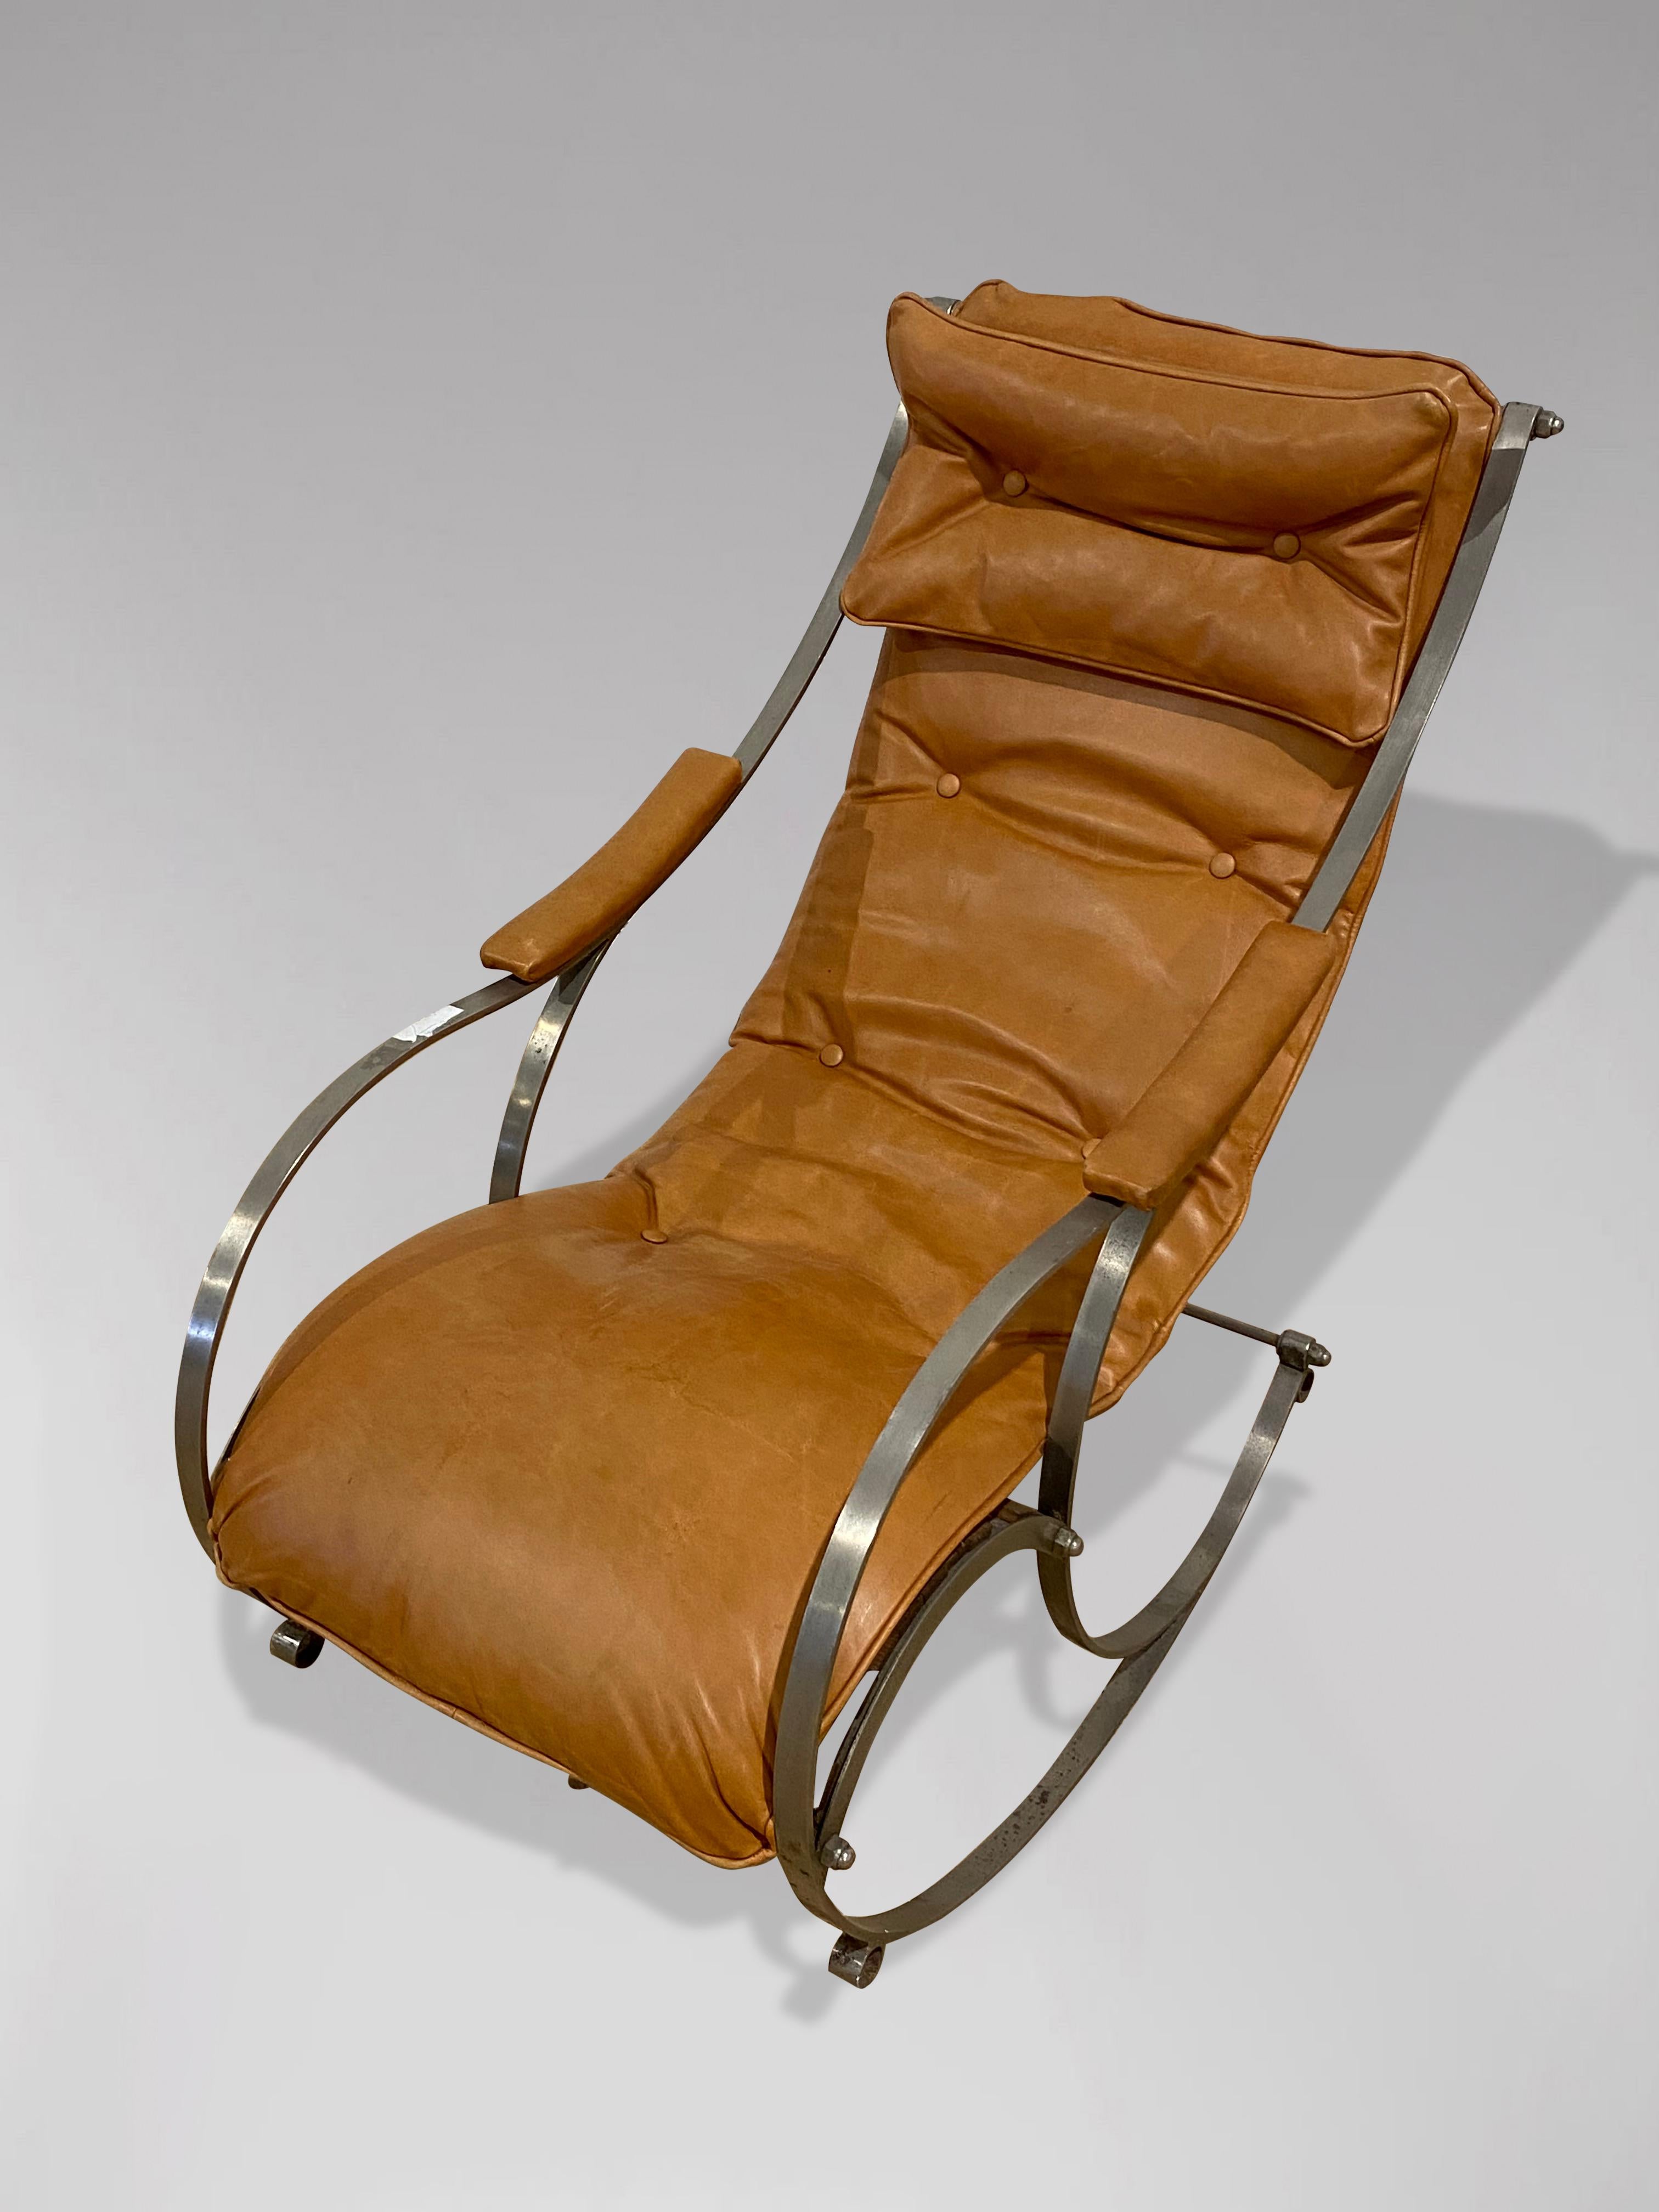 British 19th Century Campaign Rocking Armchair by Peter Cooper for R.W. Winfield